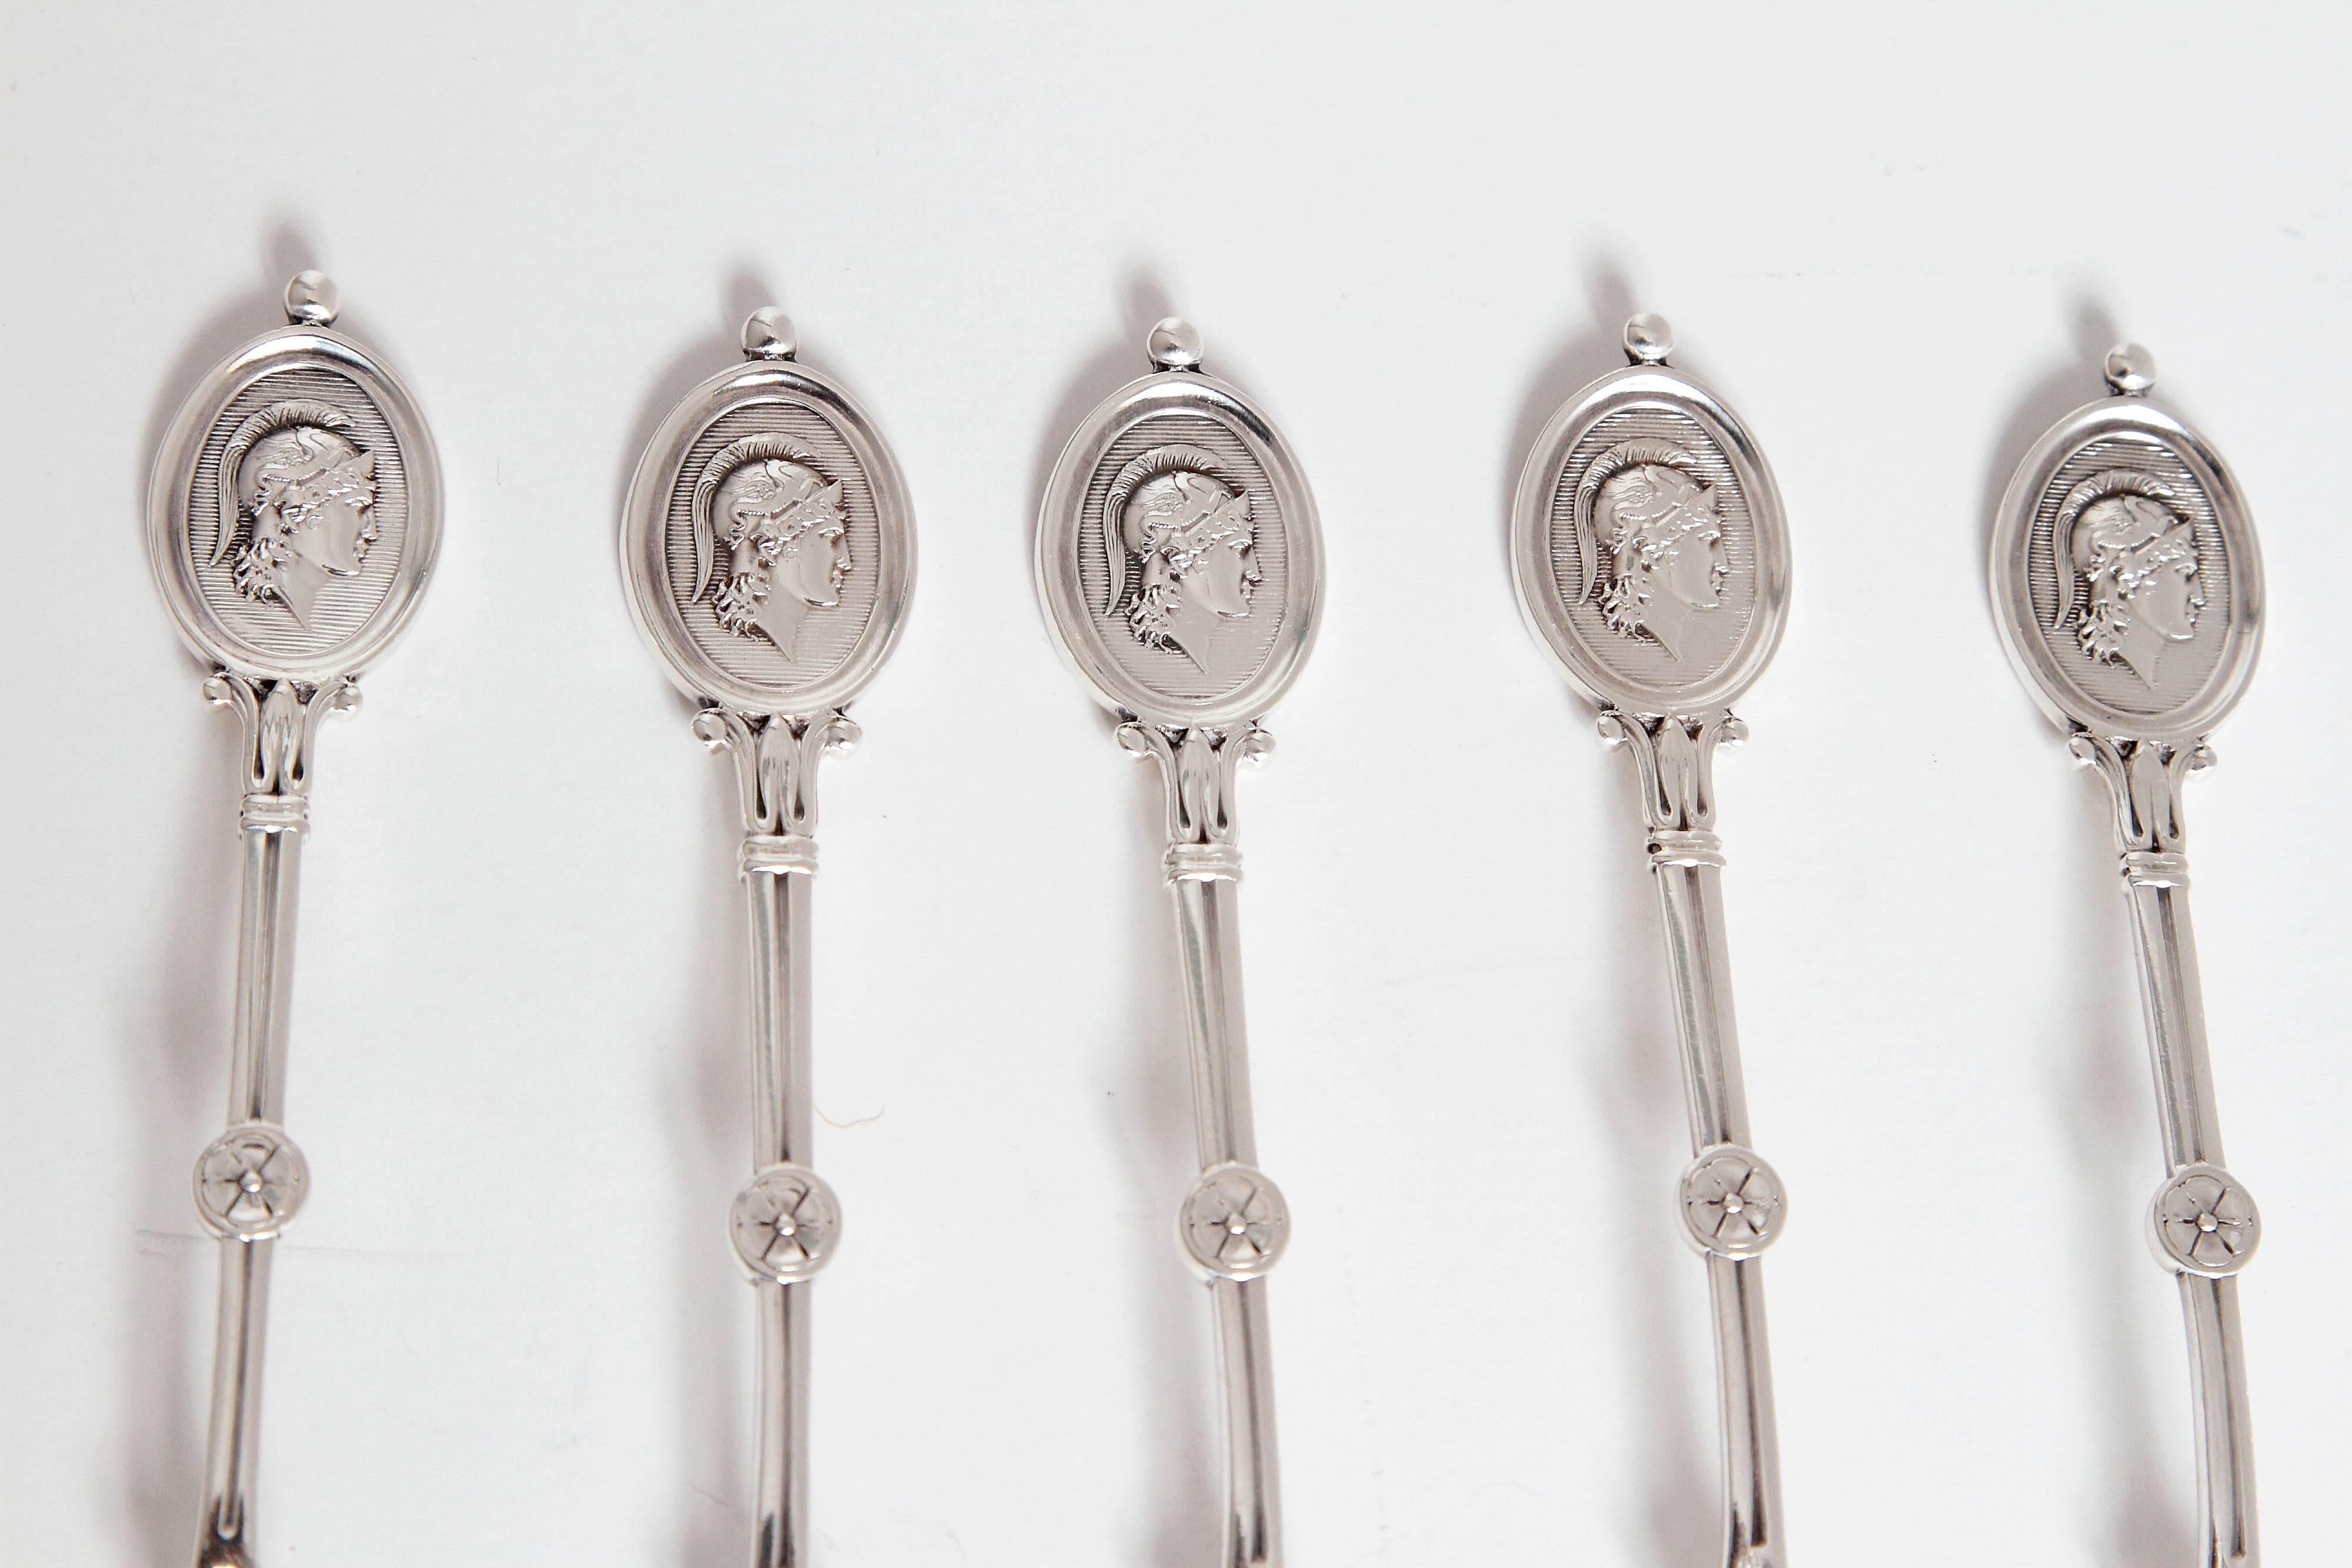 A set of 10 sterling teaspoons in the Medallion pattern by Hotchkiss & Schreuder. The retailer was Ball Black & Company, New York, circa 1870.
Marks: Patent 925, Ball Black & Co.